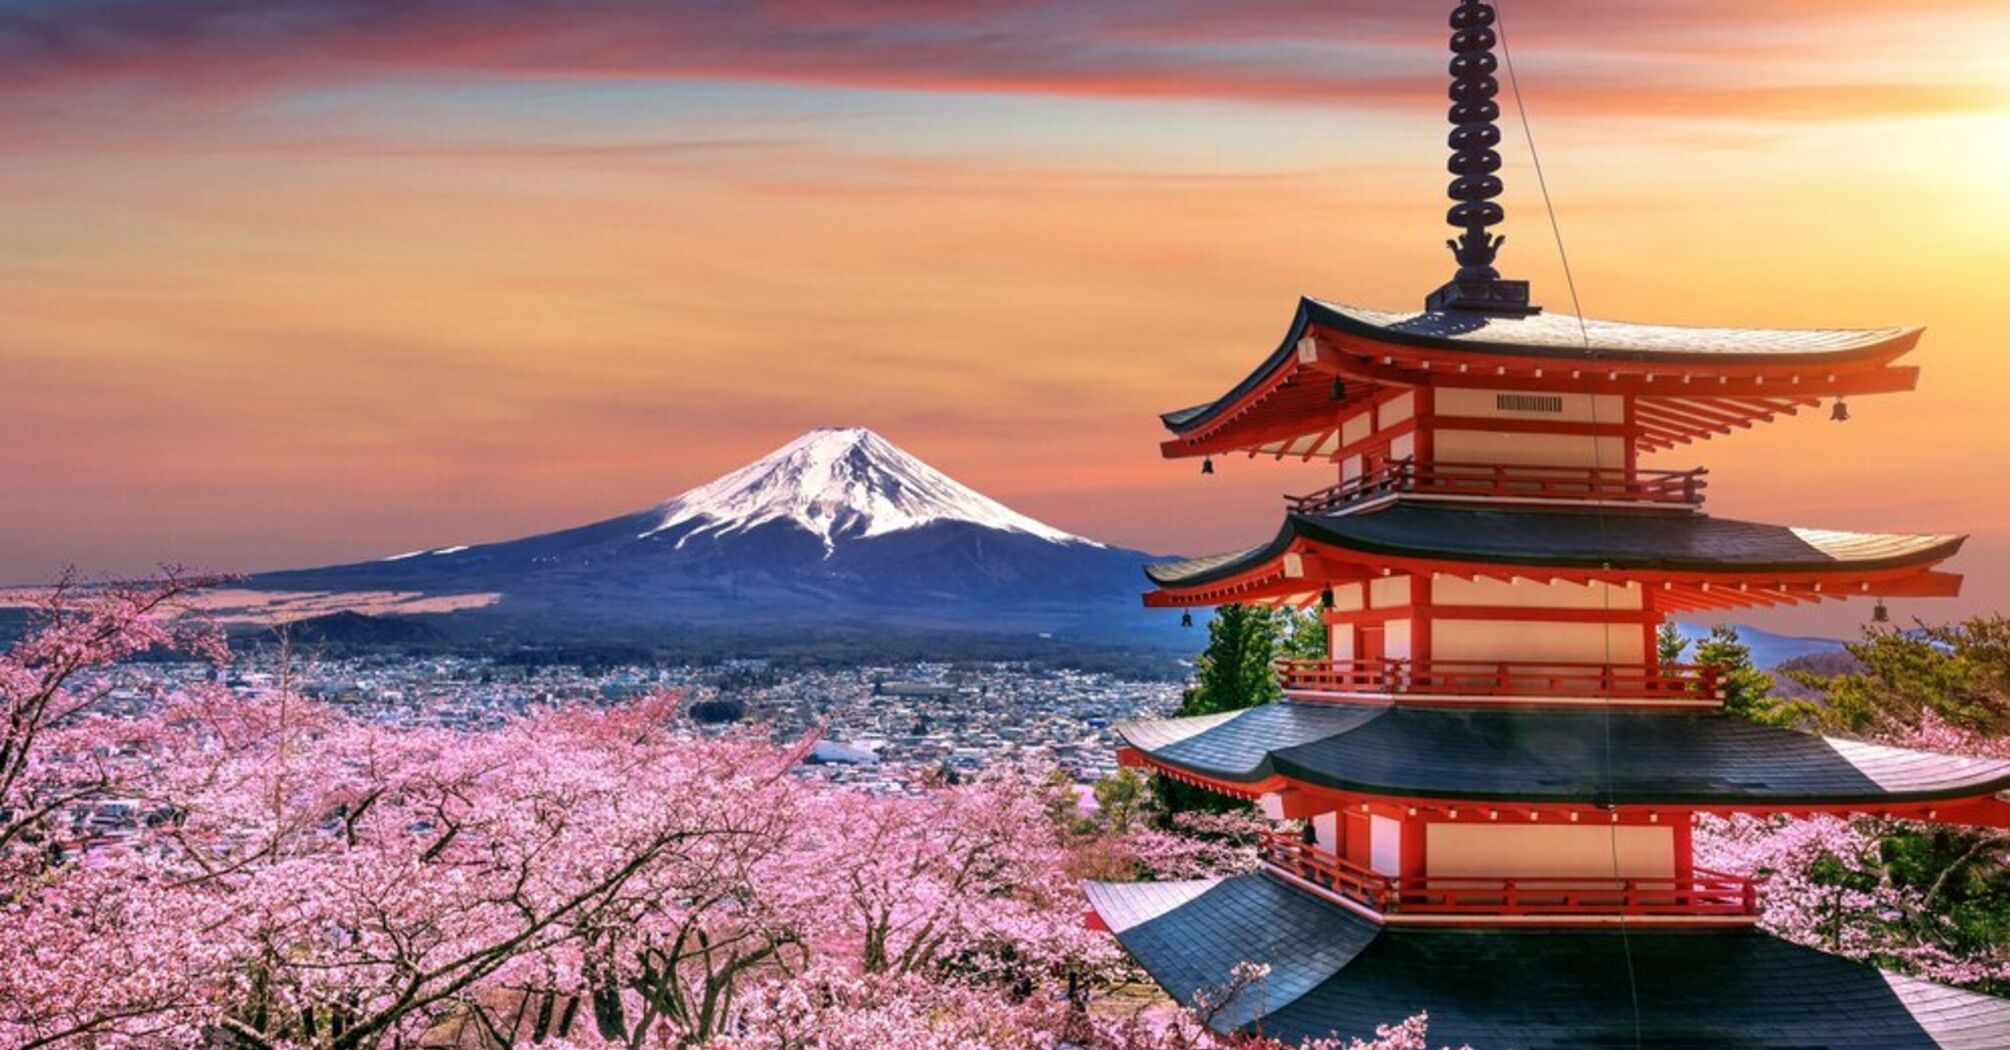 Cherry blossoms, few crowds and affordable prices: when is the perfect time to travel to Japan